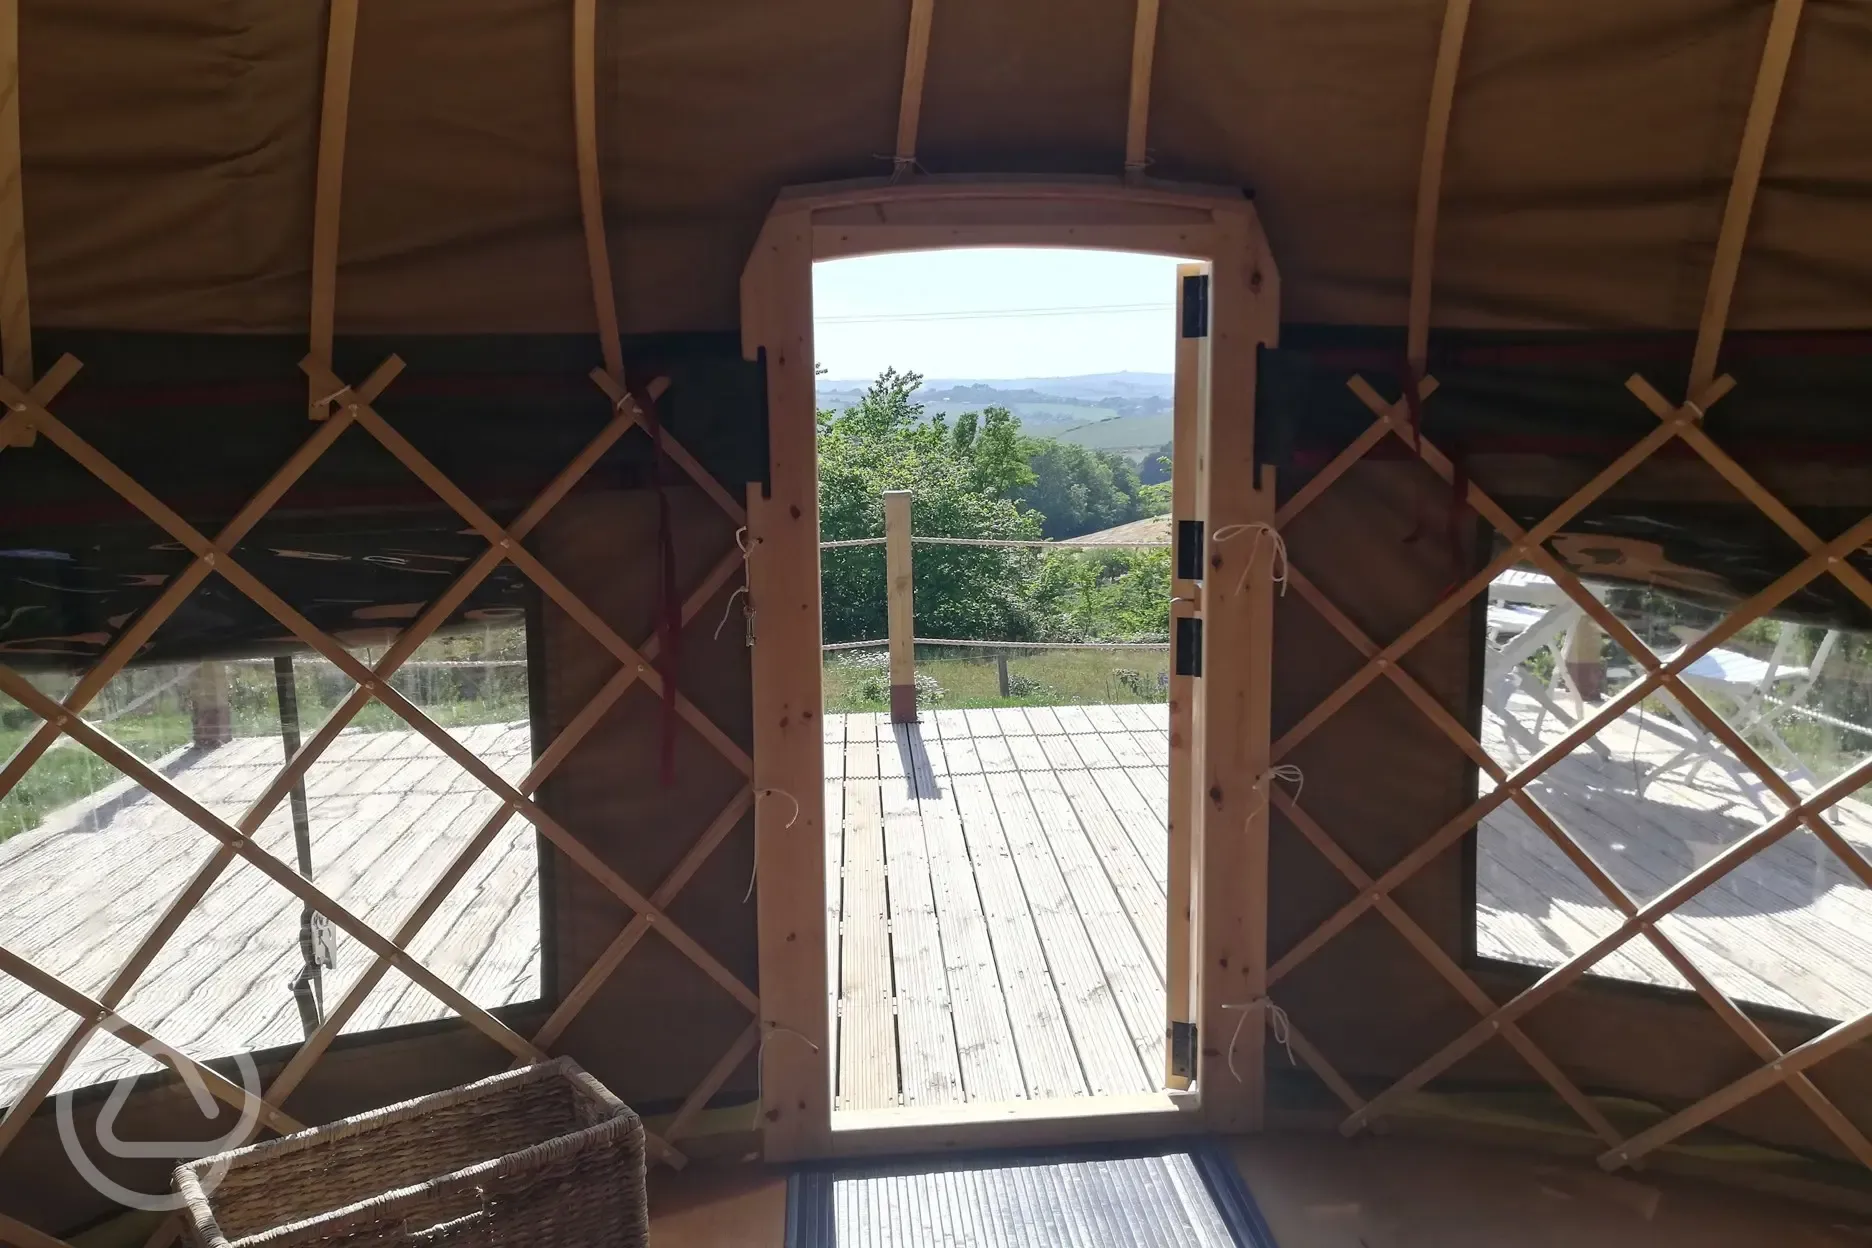 View from inside the yurt